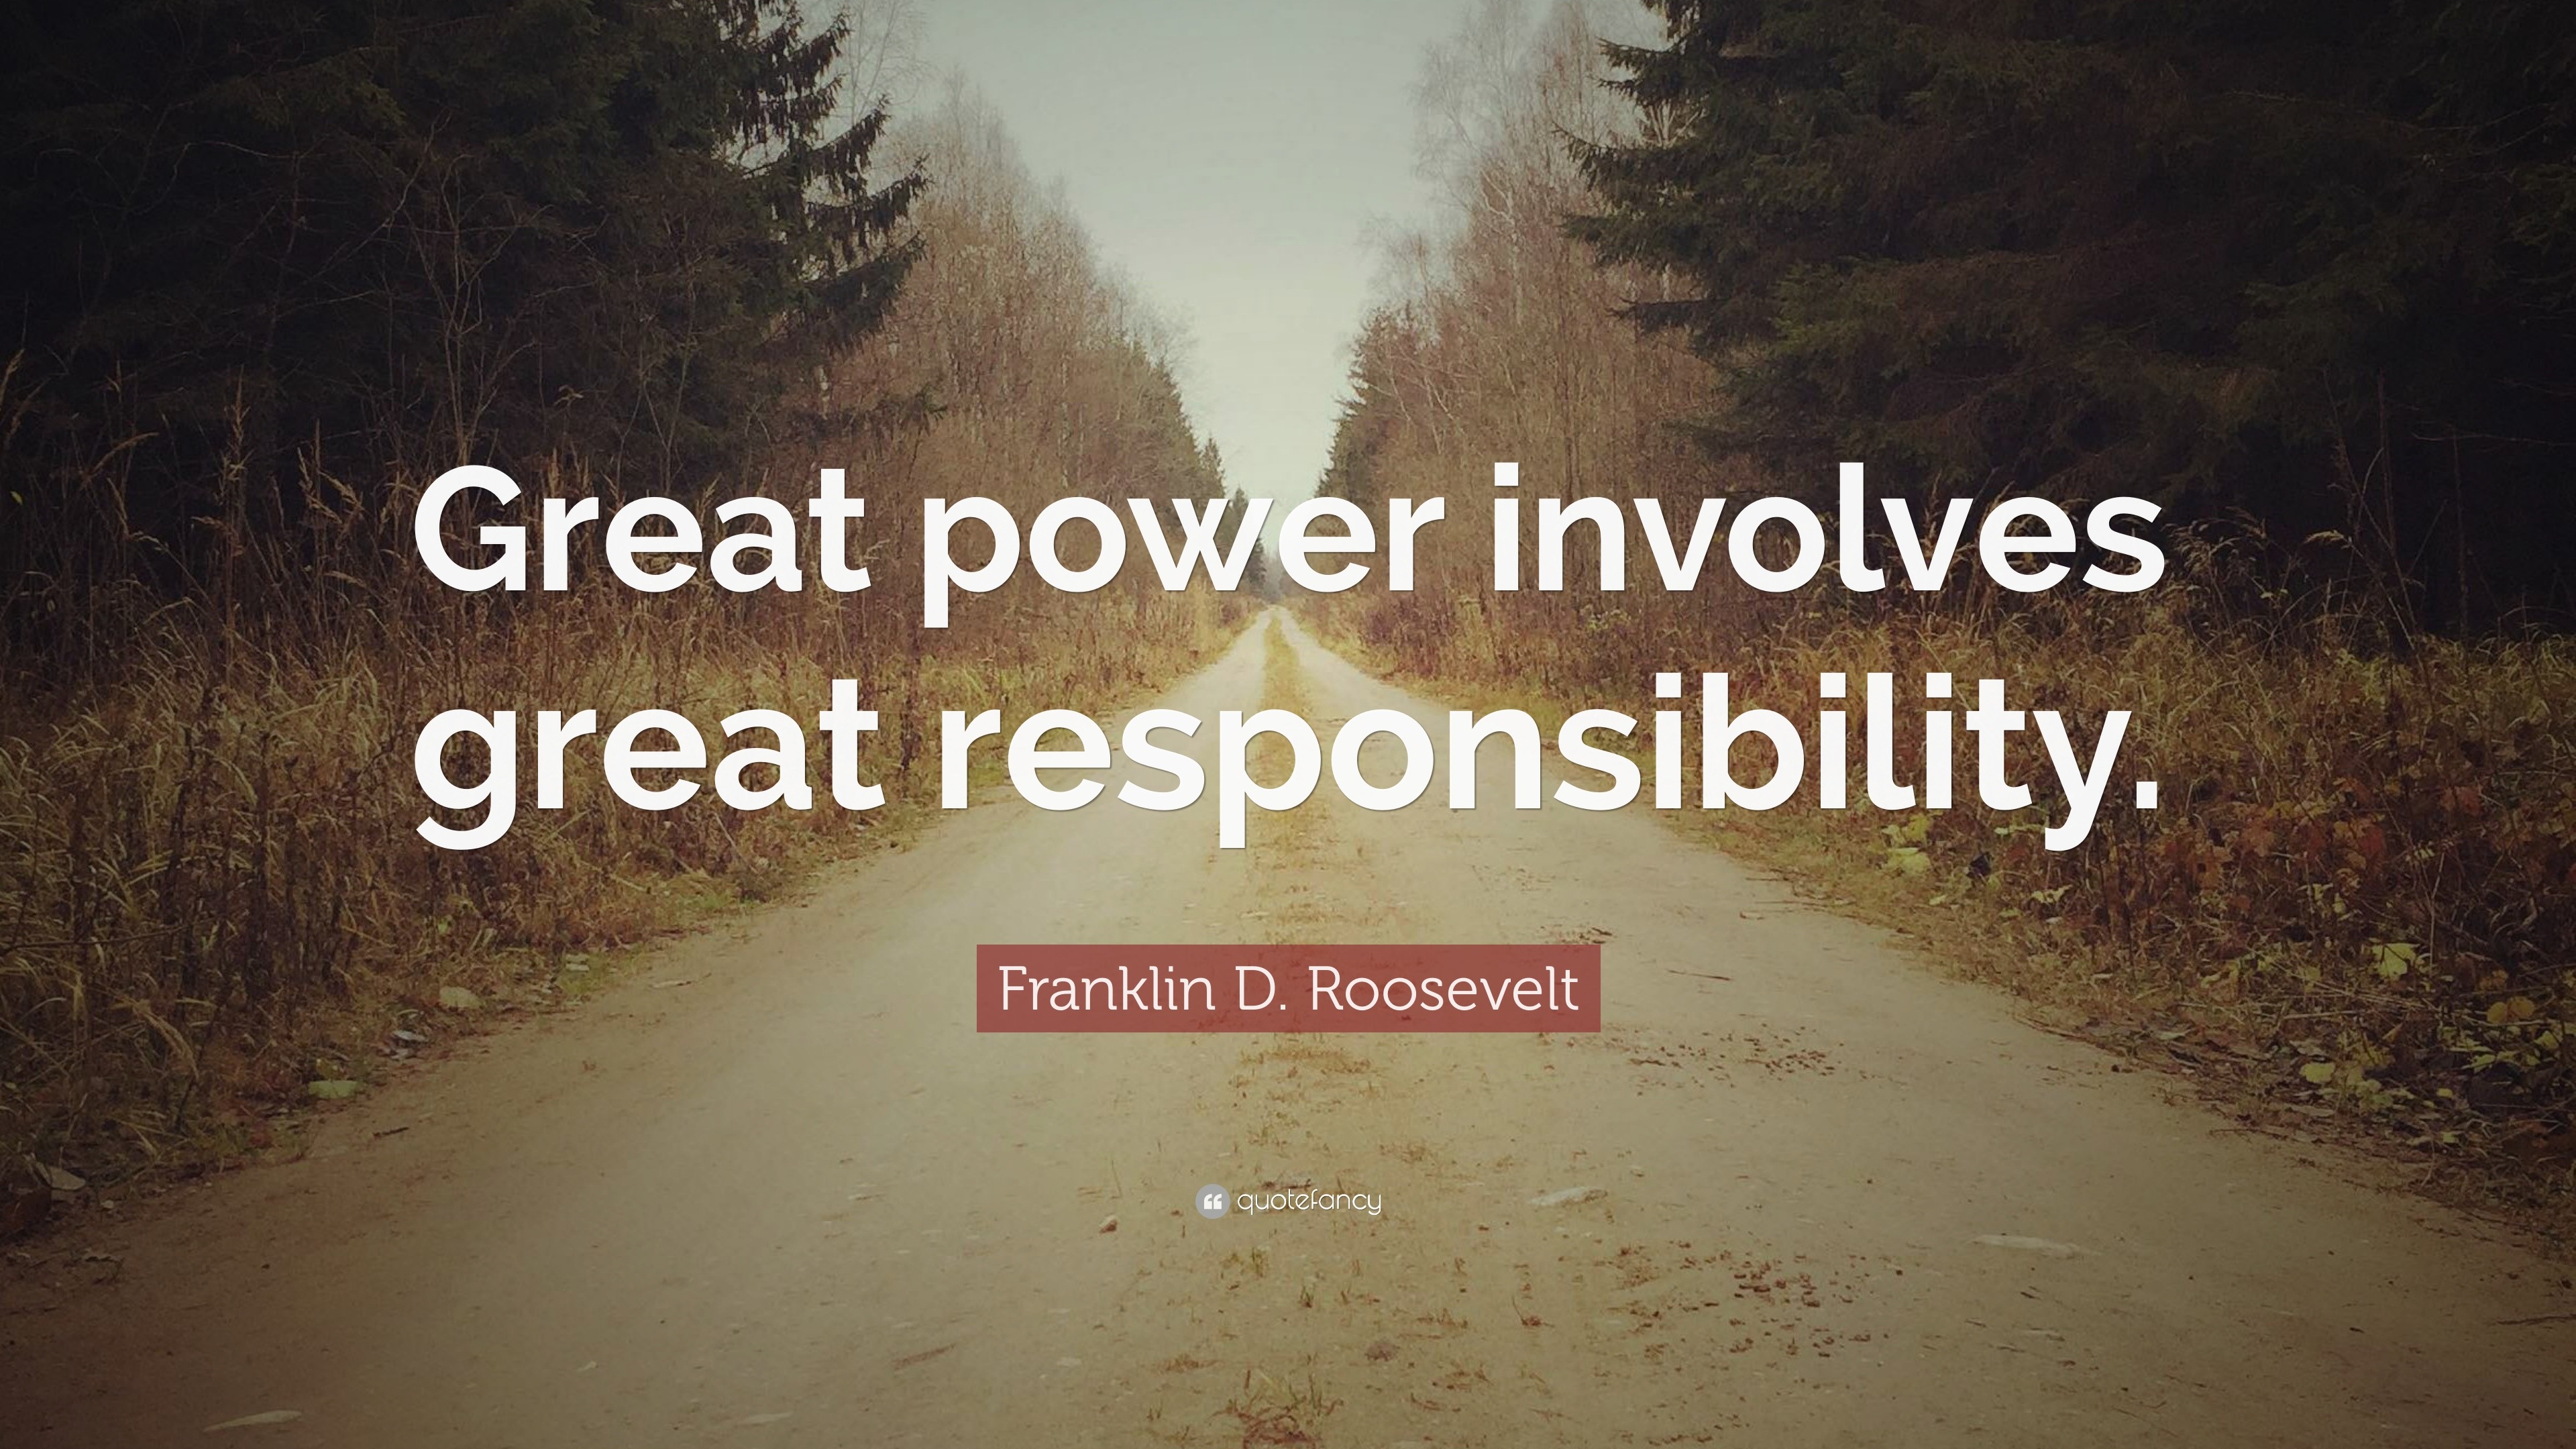 Franklin D. Roosevelt Quote: “Great power involves great responsibility